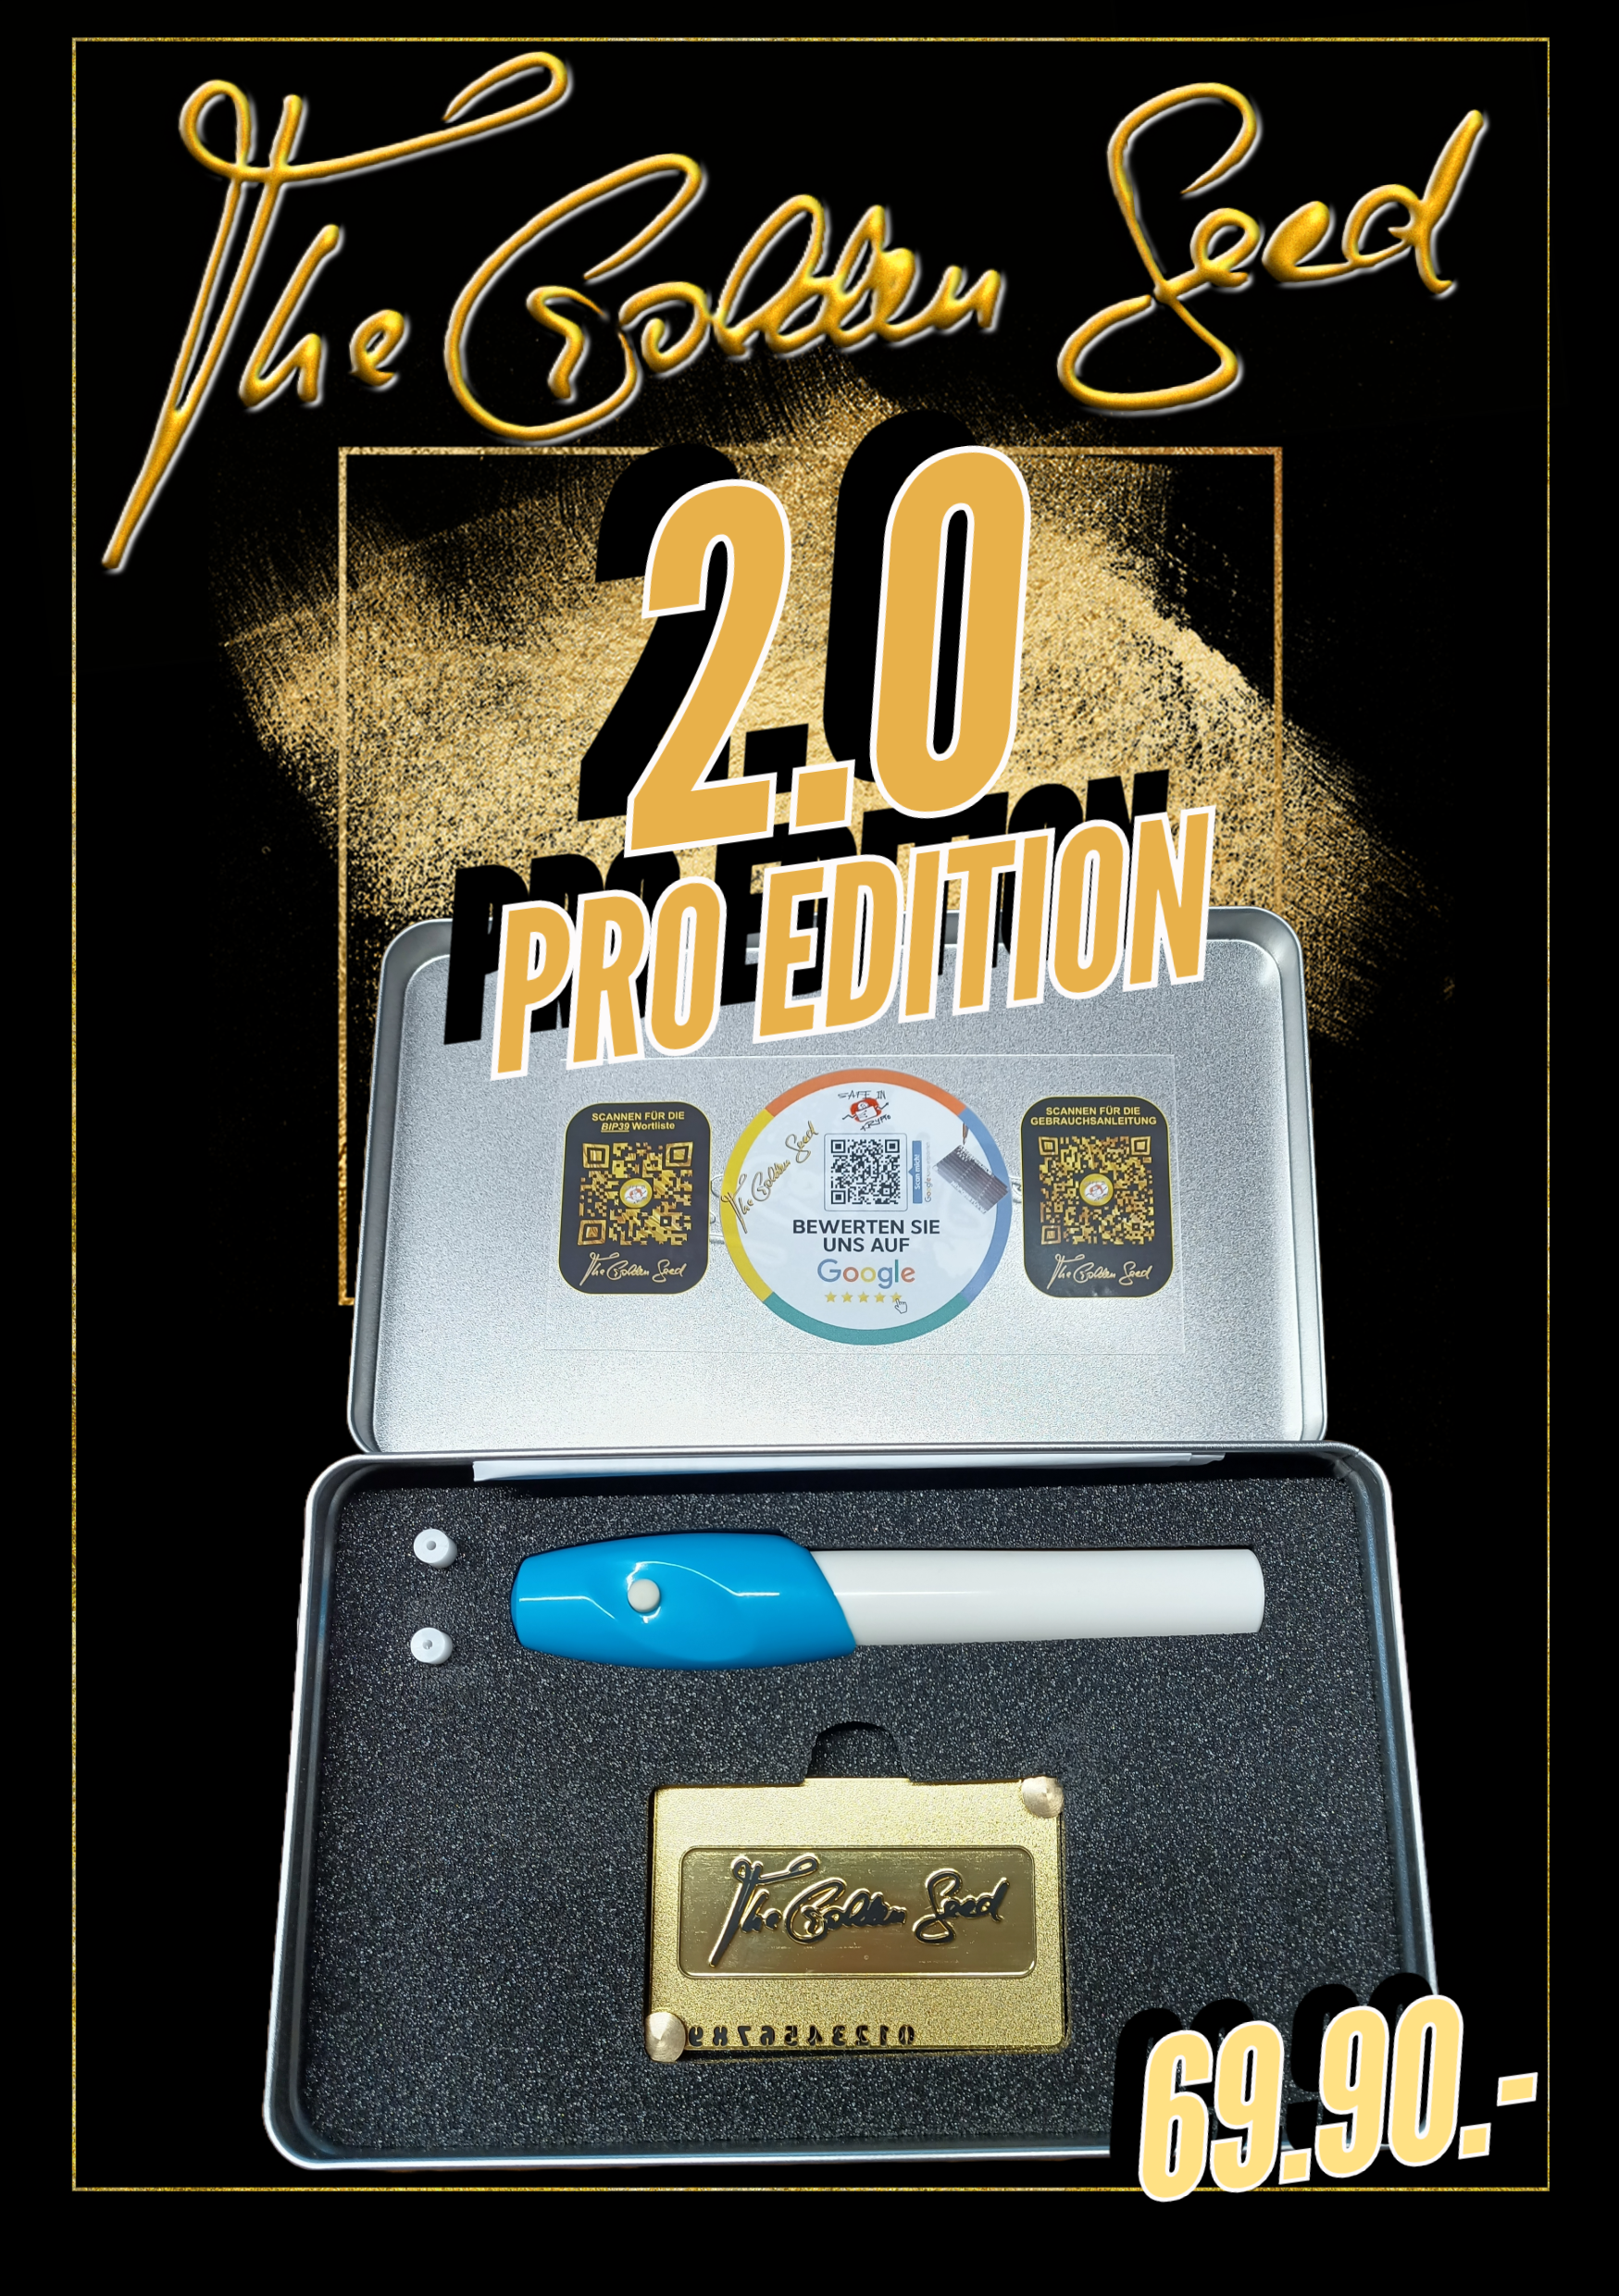 The Golden Seed 2.0 PRO EDITION